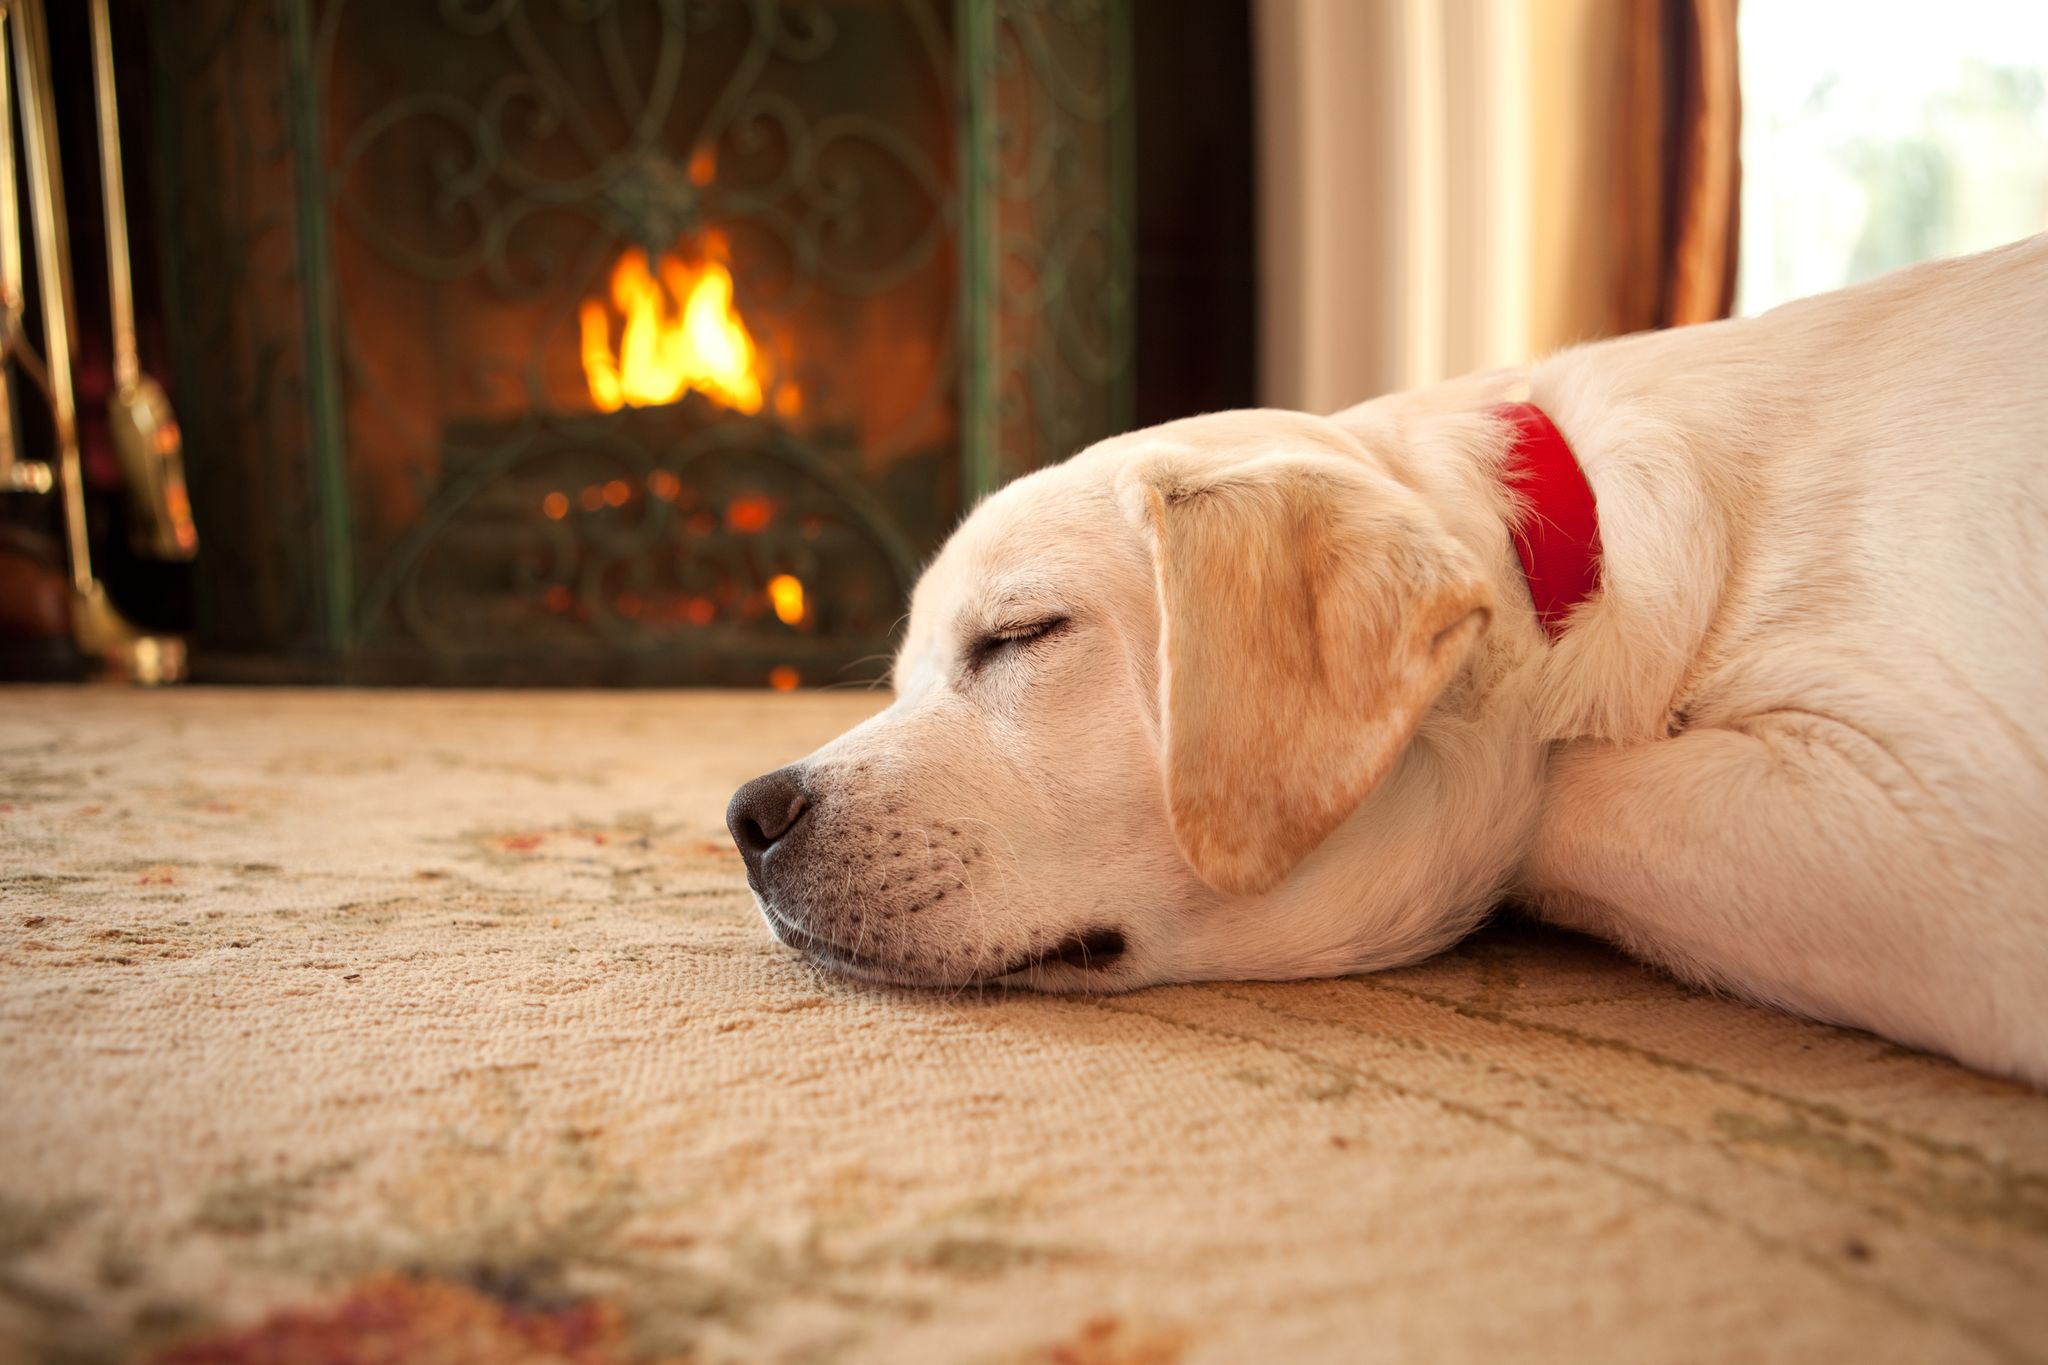 A dog sleeping by the fireplace. | Source: Getty Images